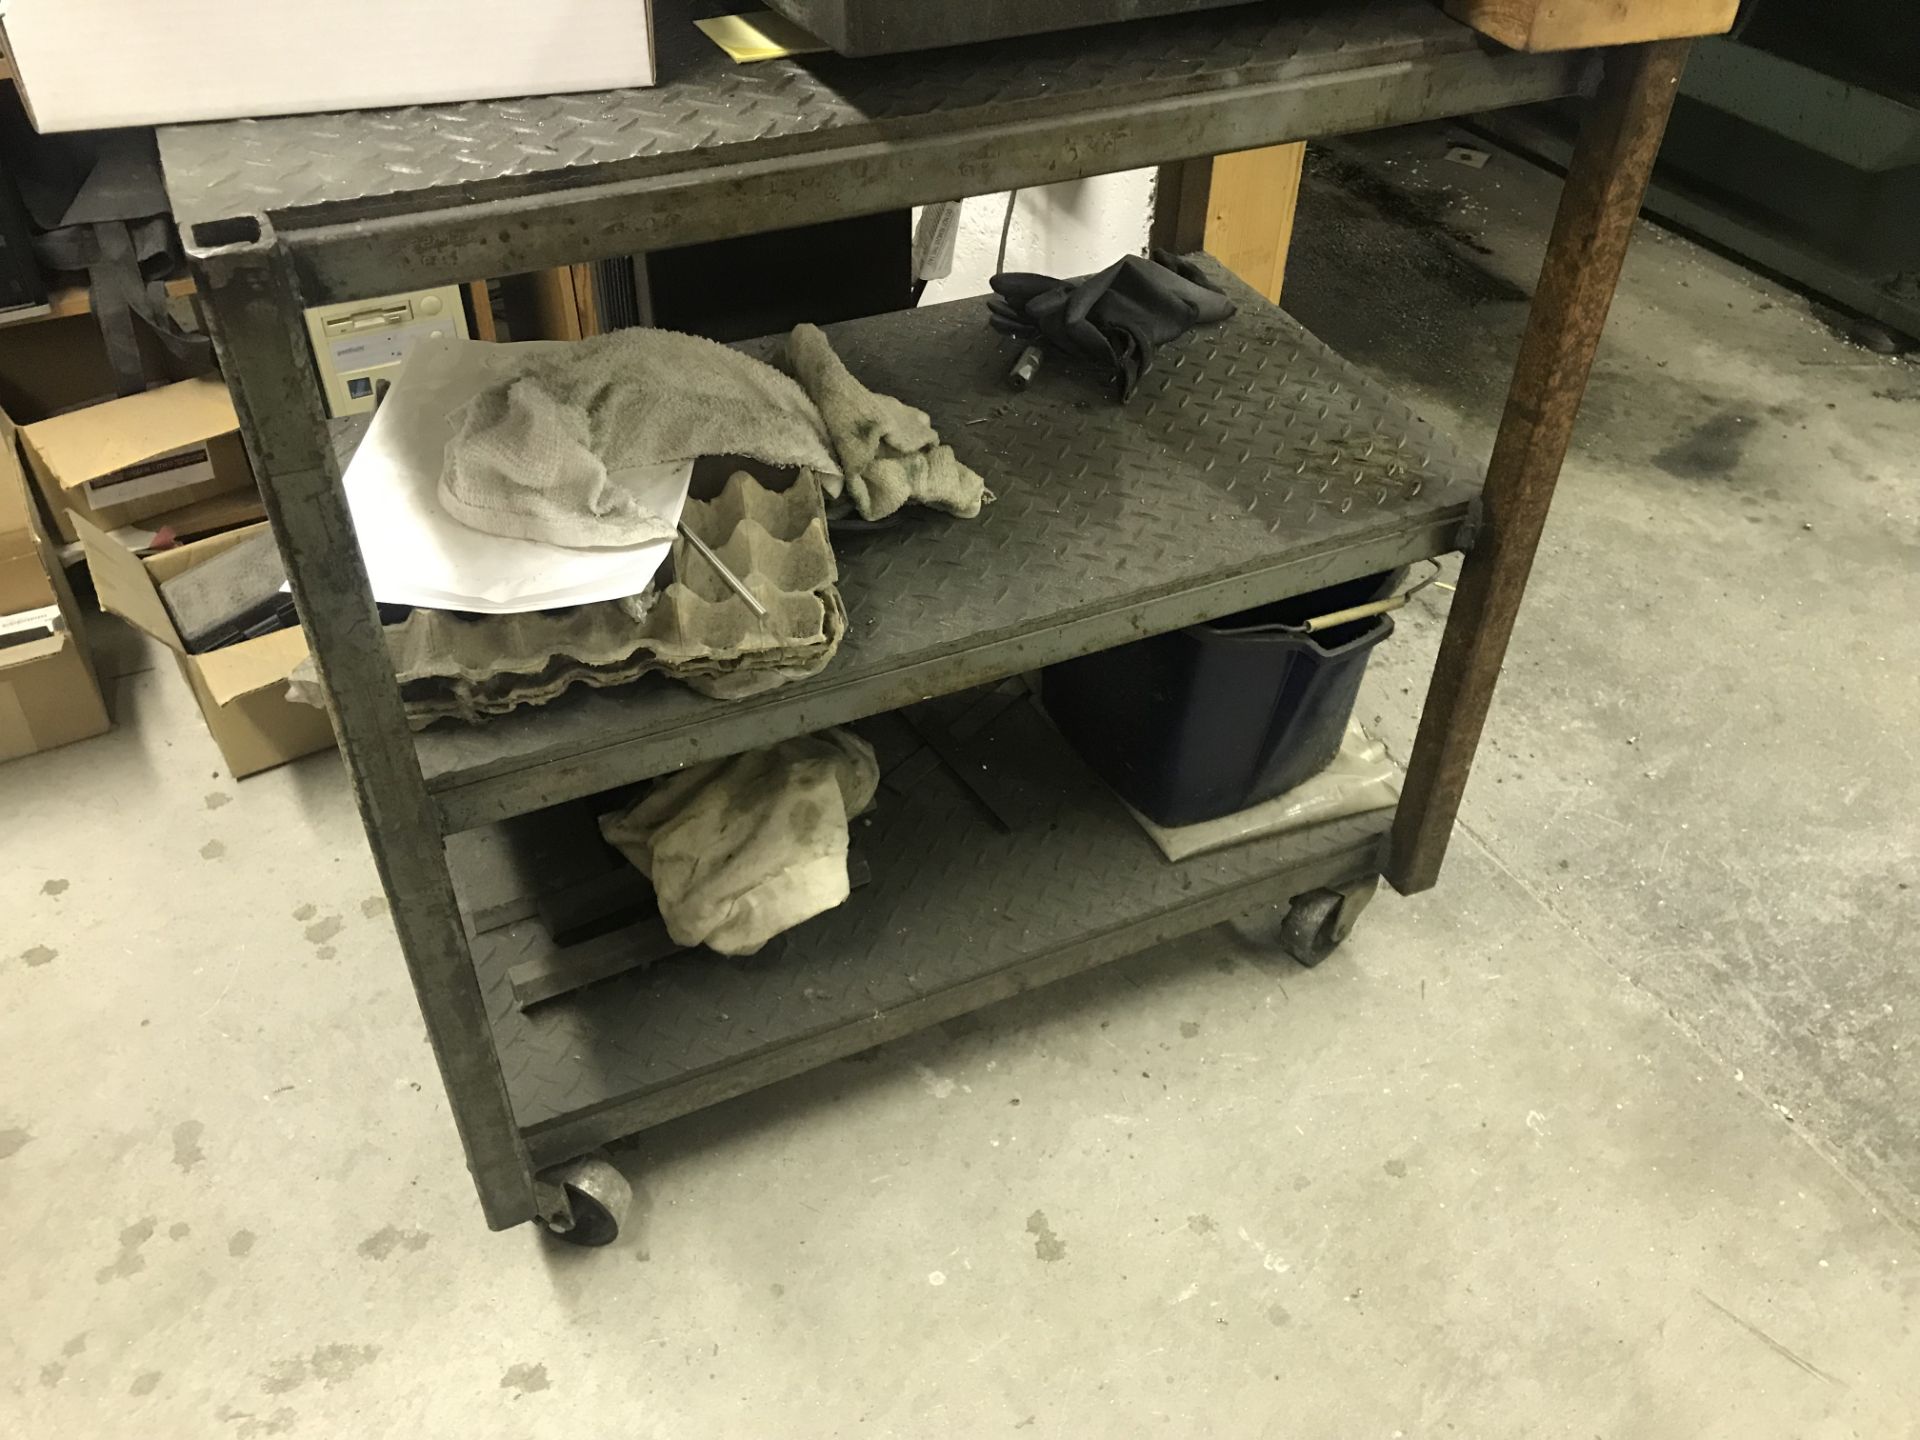 HEAVY DUTY METAL ROLLING SHOP CART (2) 36" X 21" X 37" AND 34" X 21" X 35" - Image 2 of 2